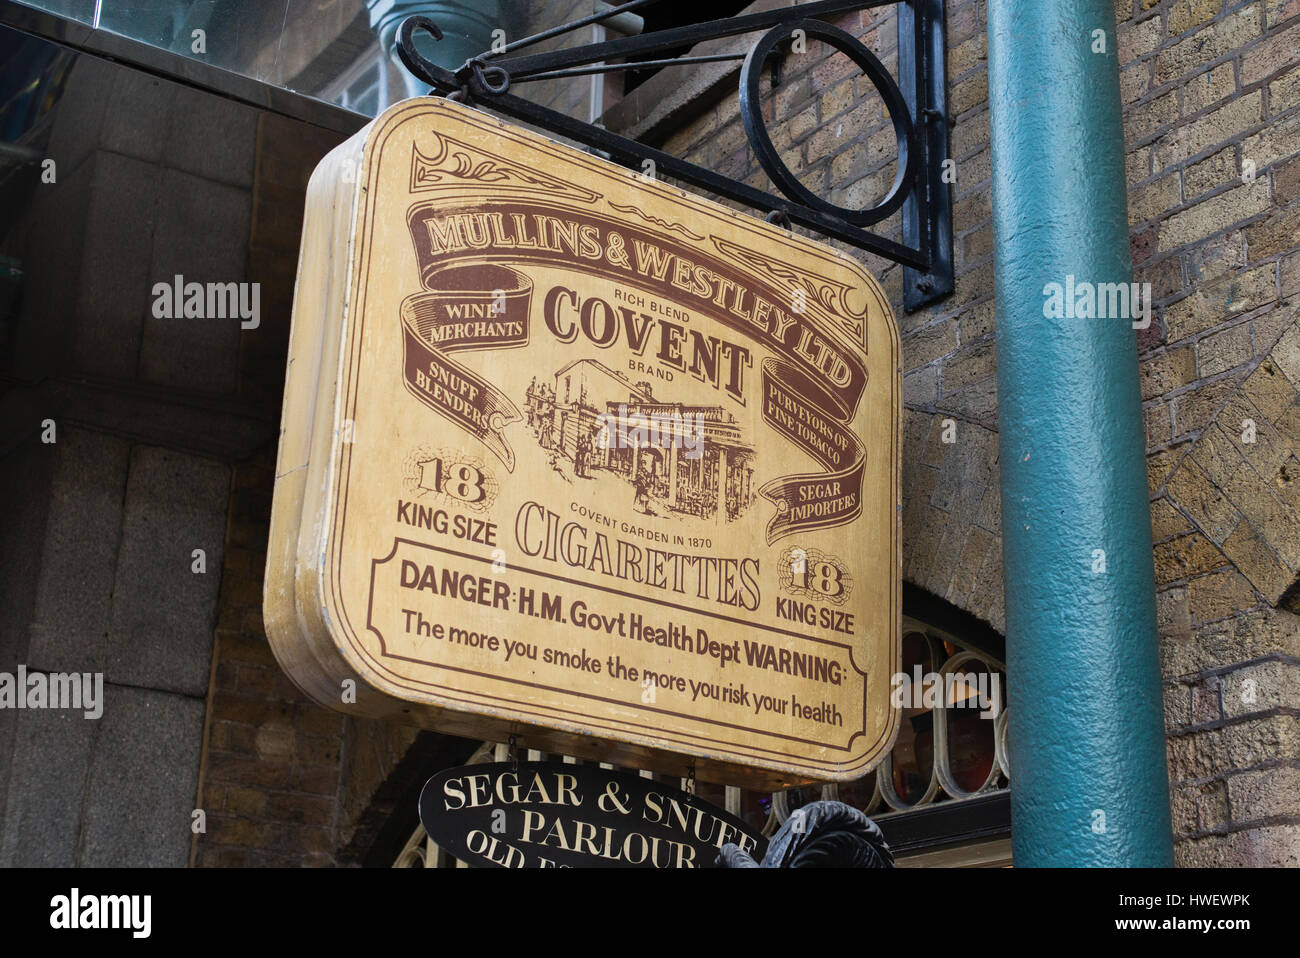 Tobacco Shop sign, Covent Garden Piazza, London, England Stock Photo